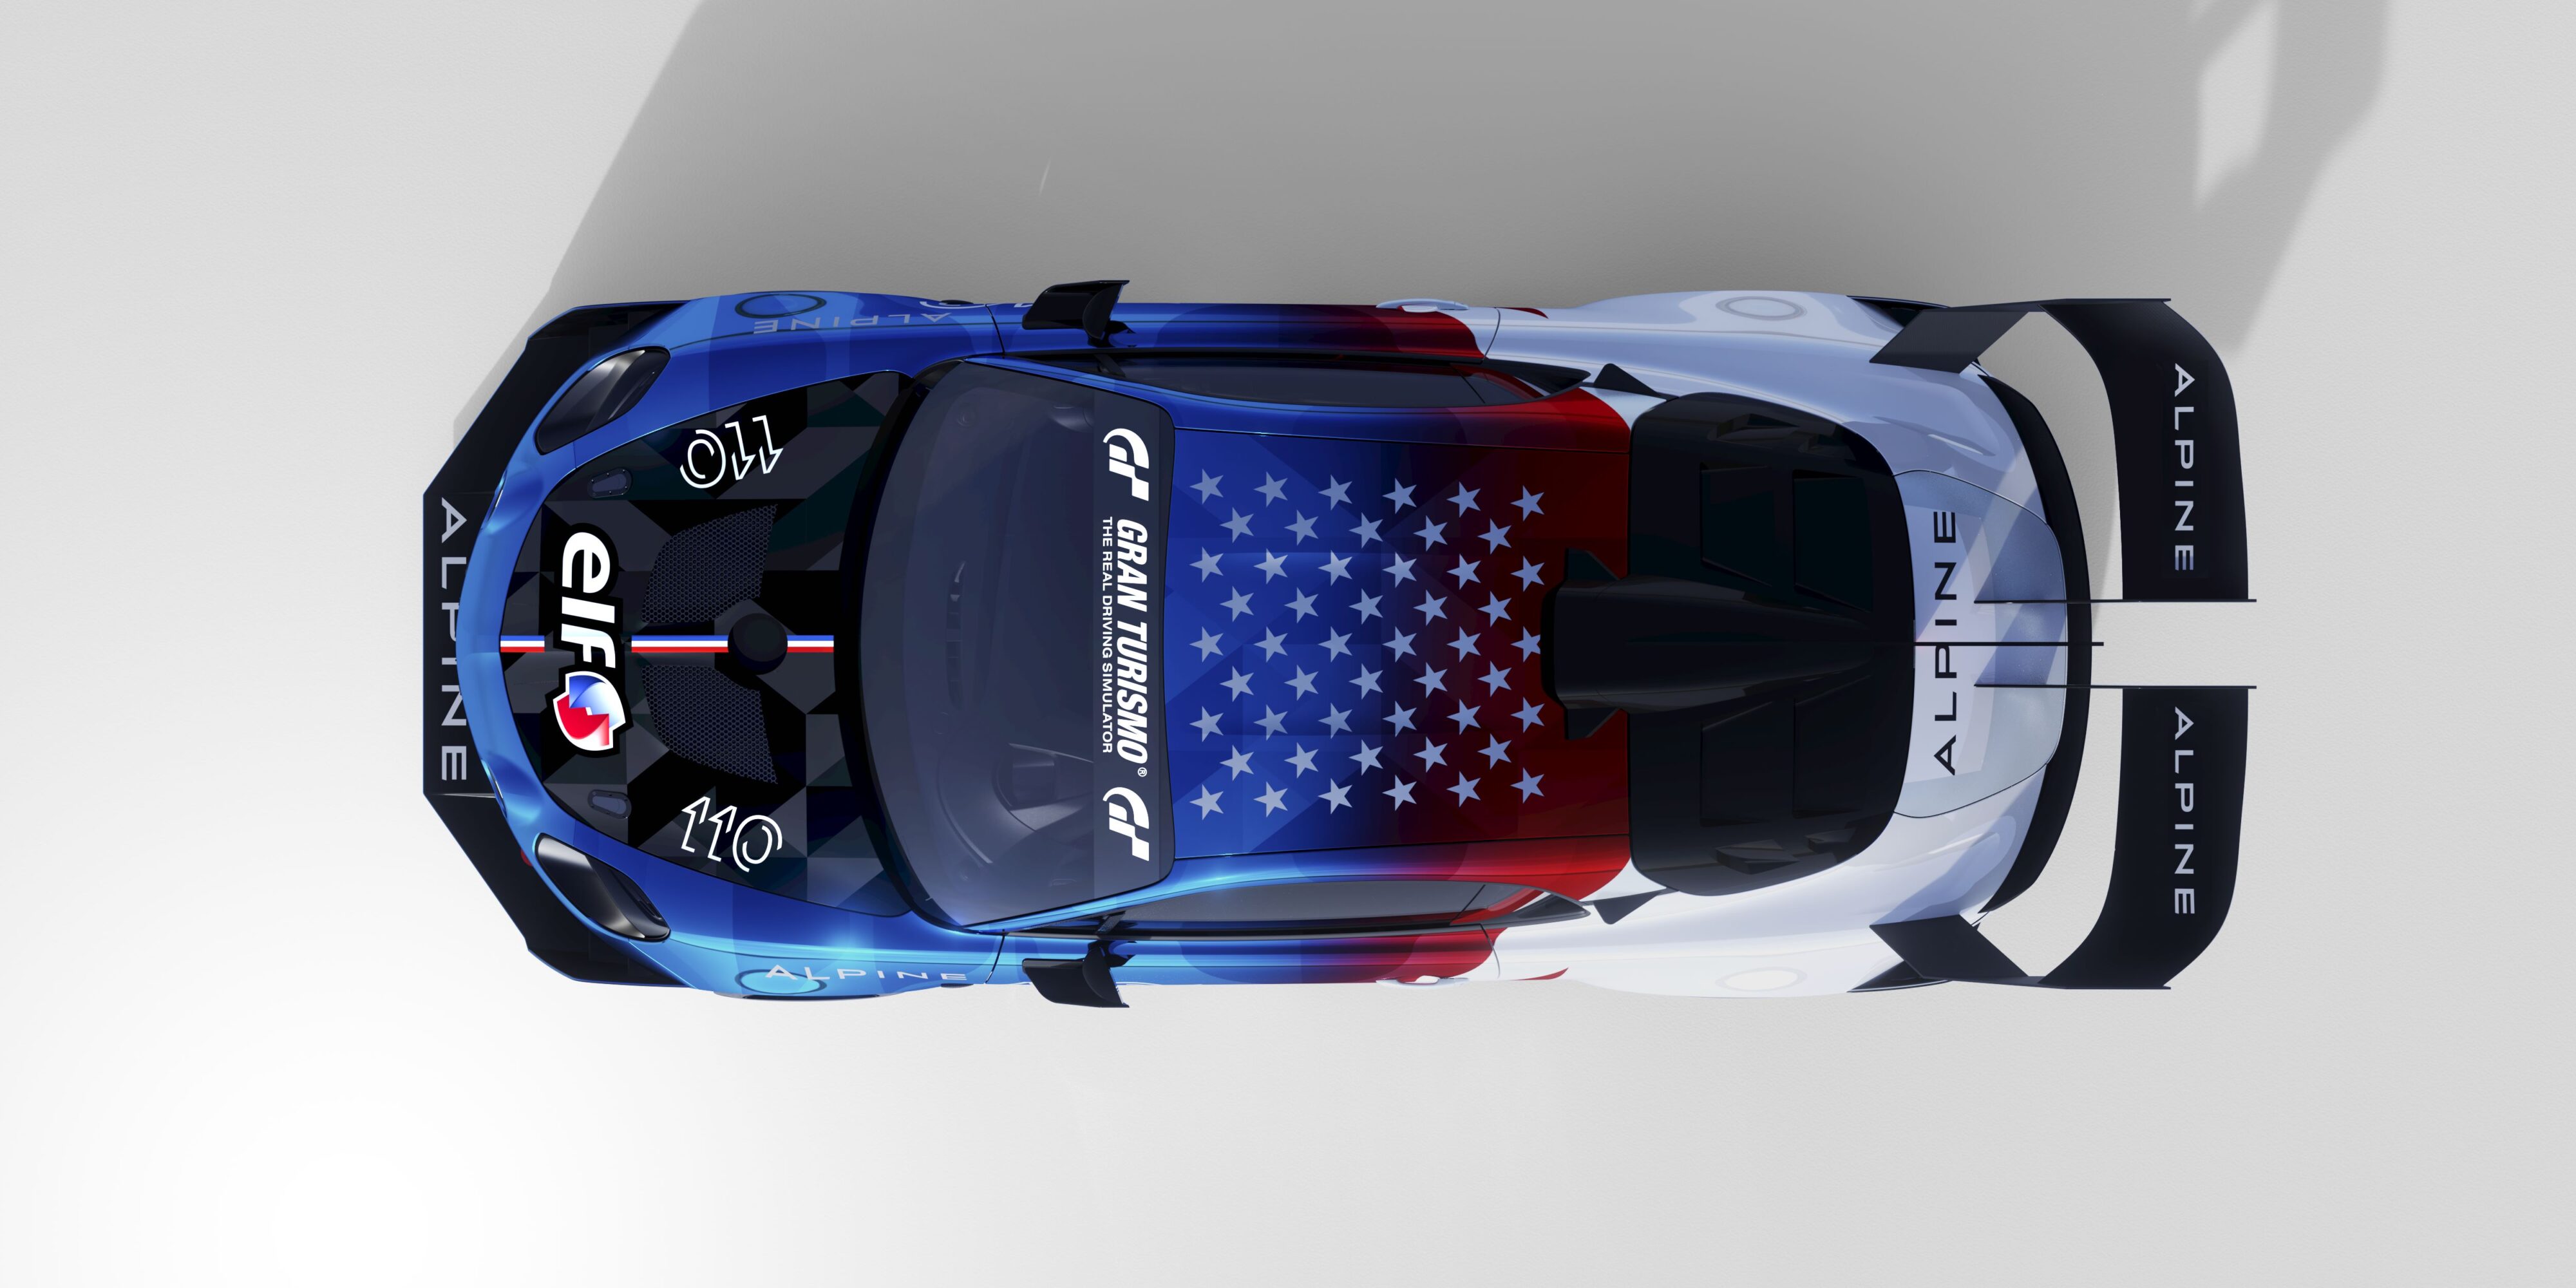 Overhead view of the Alpine A110 Pikes Peak